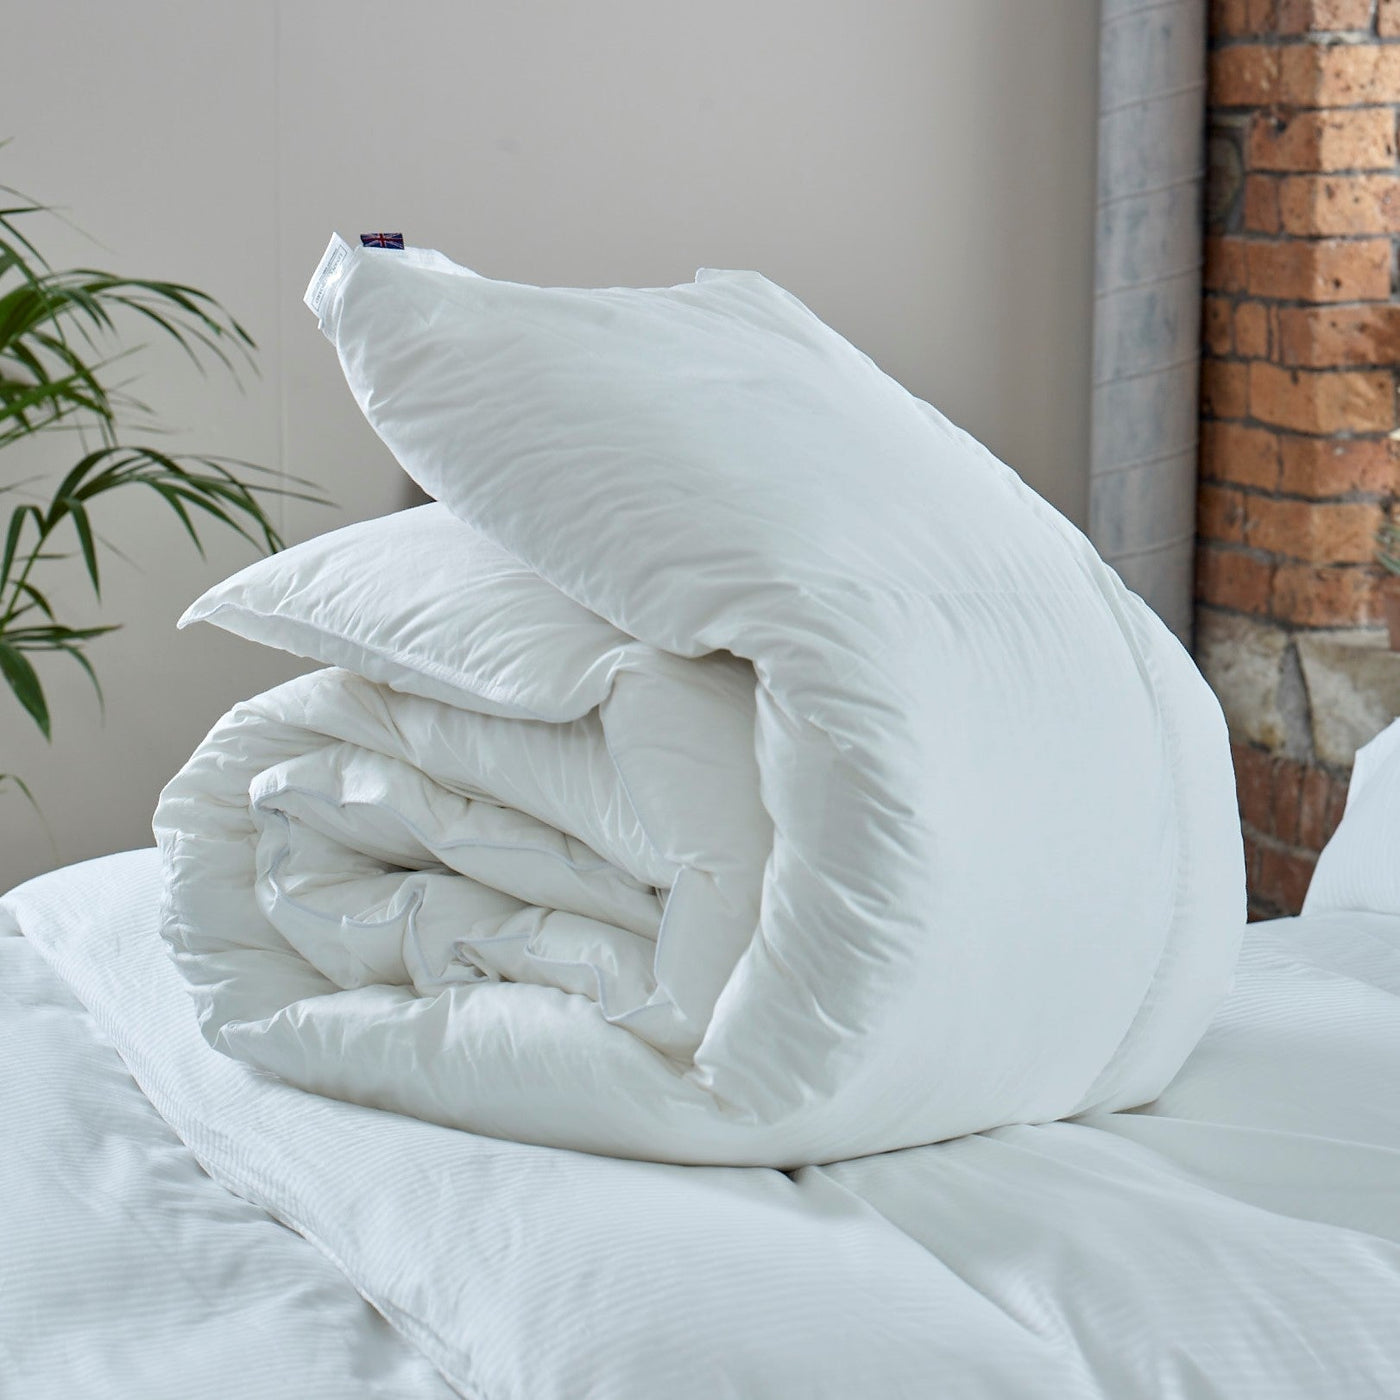 Comforel Small Double Duvet - 50% OFF